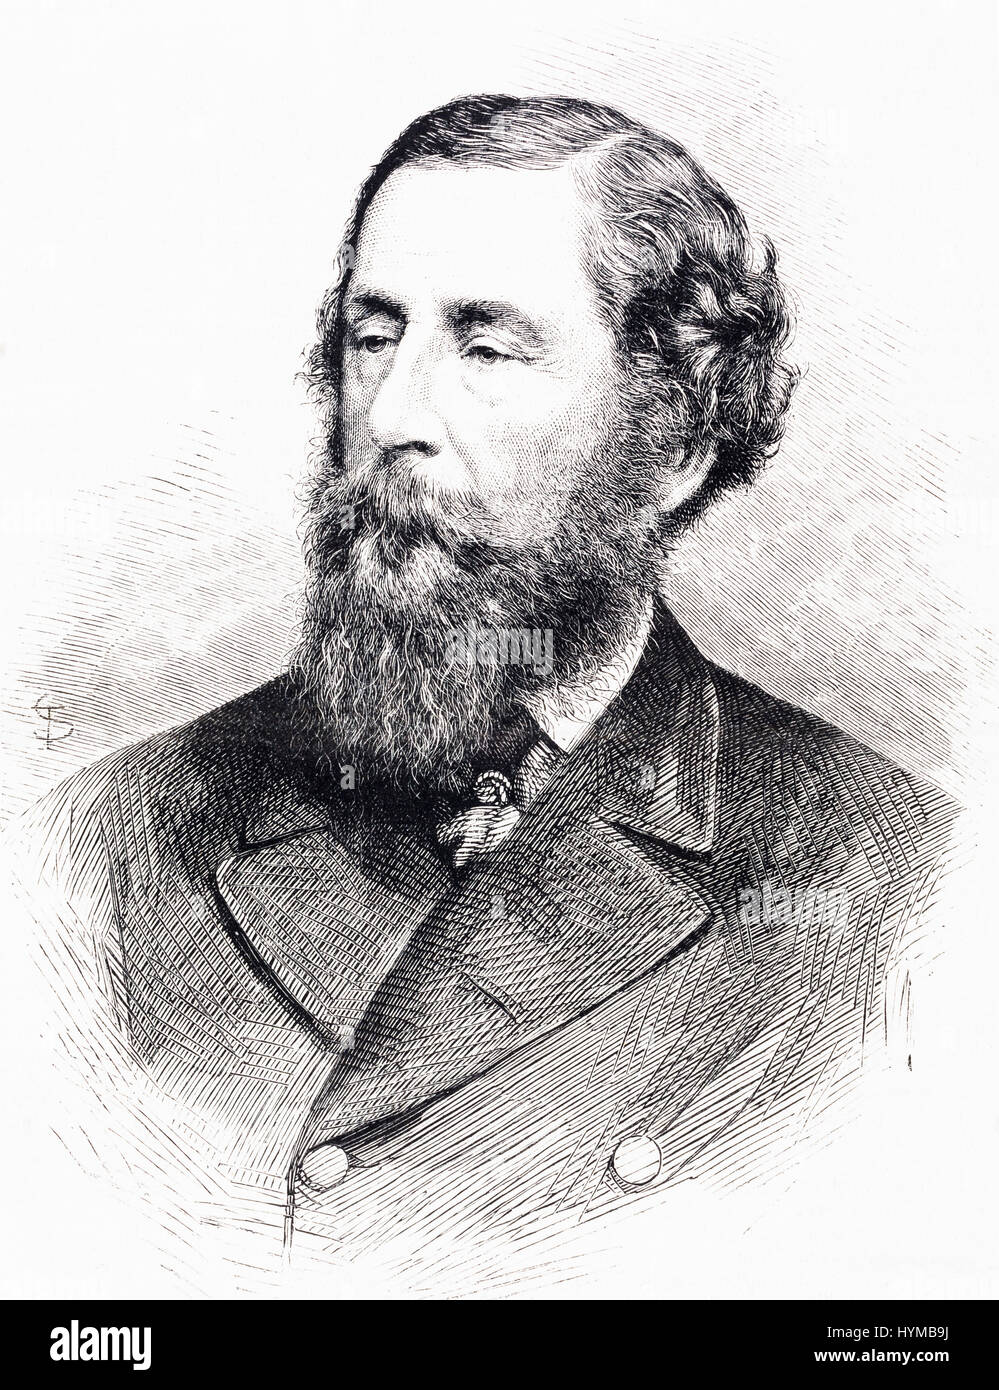 James Hamilton, 1st Duke of Abercorn, 1811 – 1885, Viscount Hamilton and Marquess of Abercorn. British Conservative politician and statesman who twice served as Lord Lieutenant of Ireland.  From L'Univers Illustre published 1867. Stock Photo